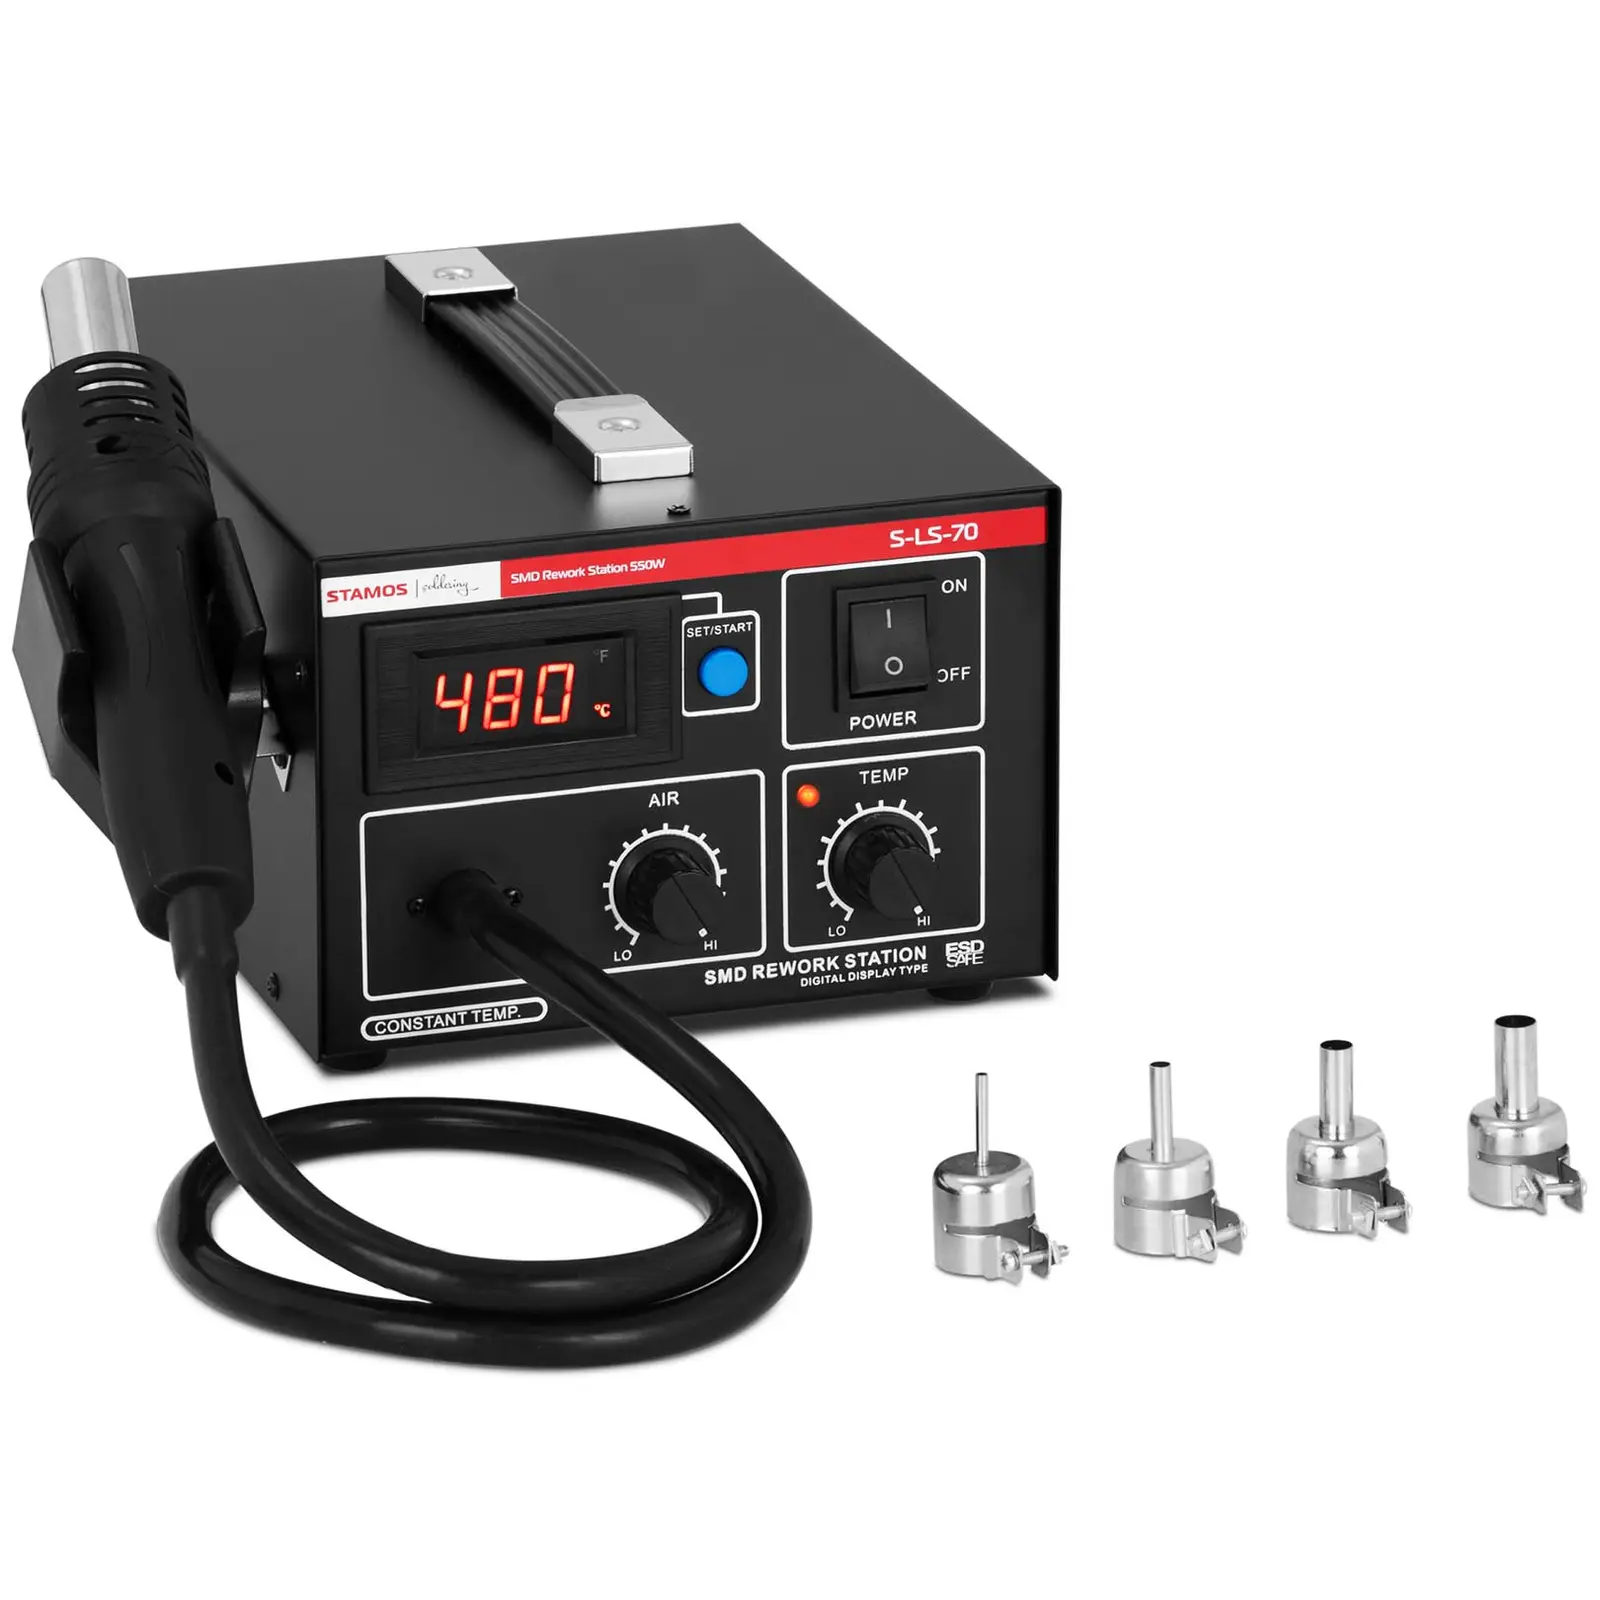 Soldering Station - with hot air gun - 550 W - LED display